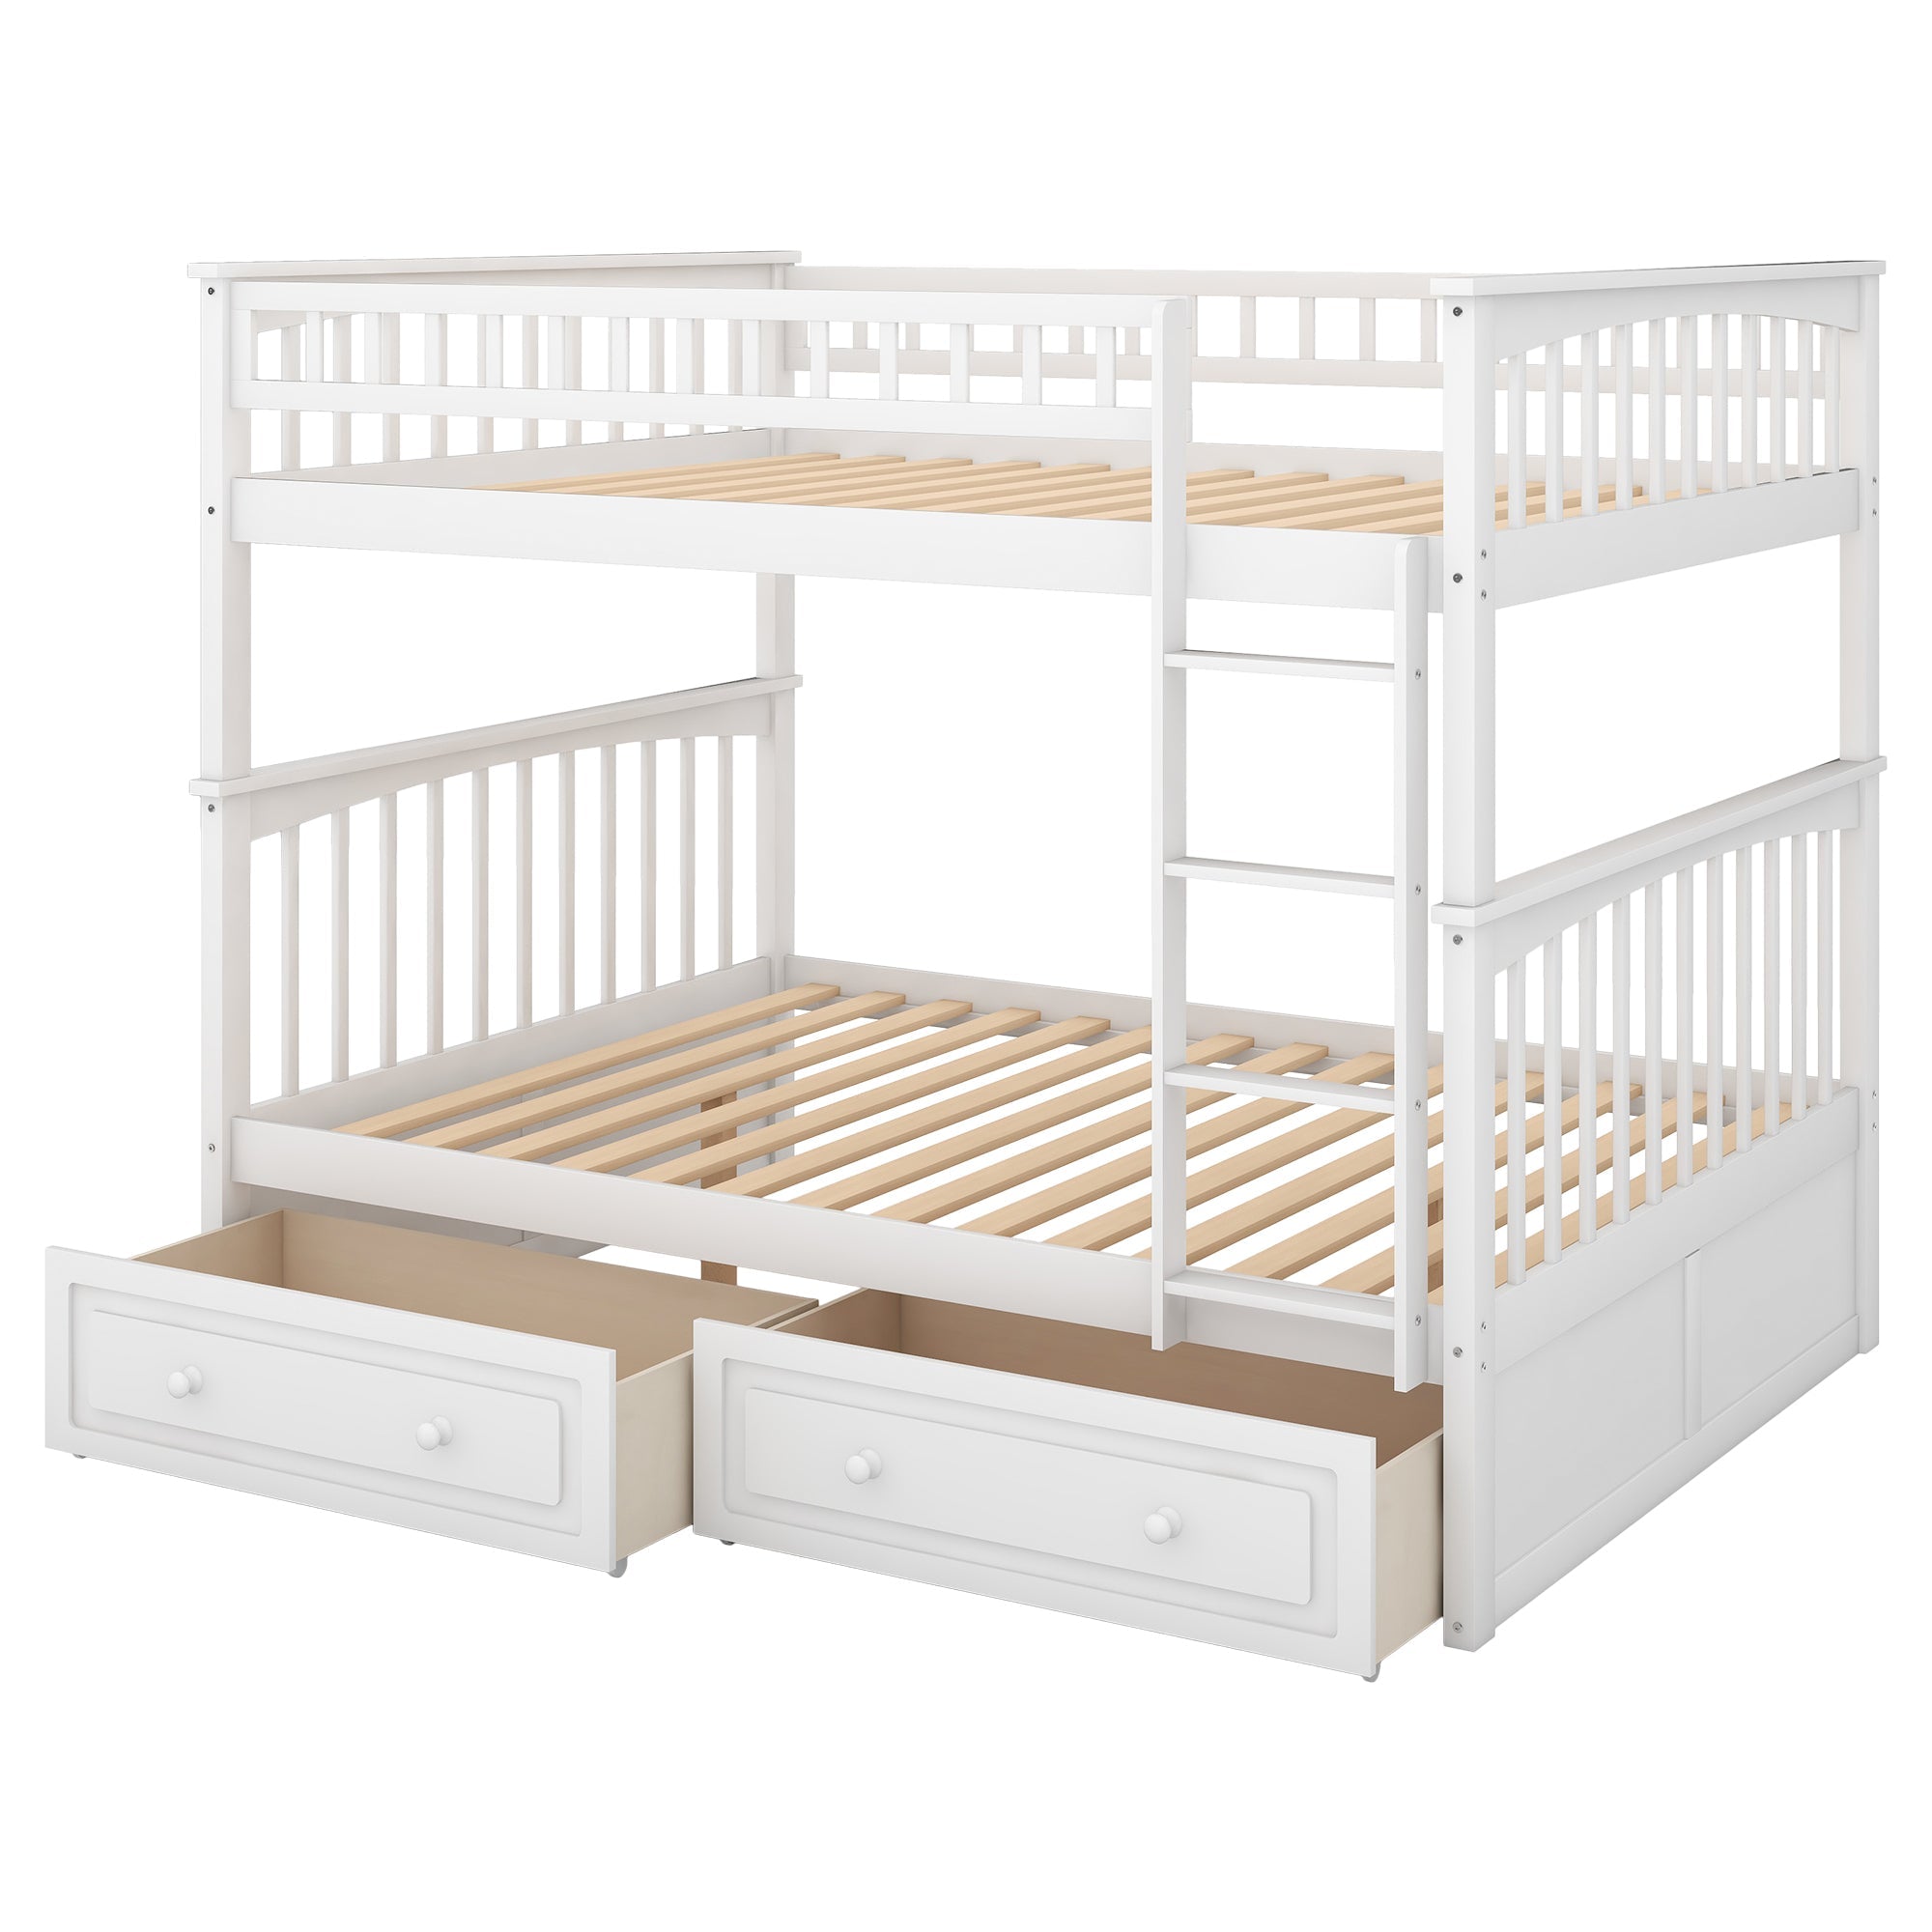 Euroco Pine Wood Bunk Bed With Storage, Full-Over-Full, White